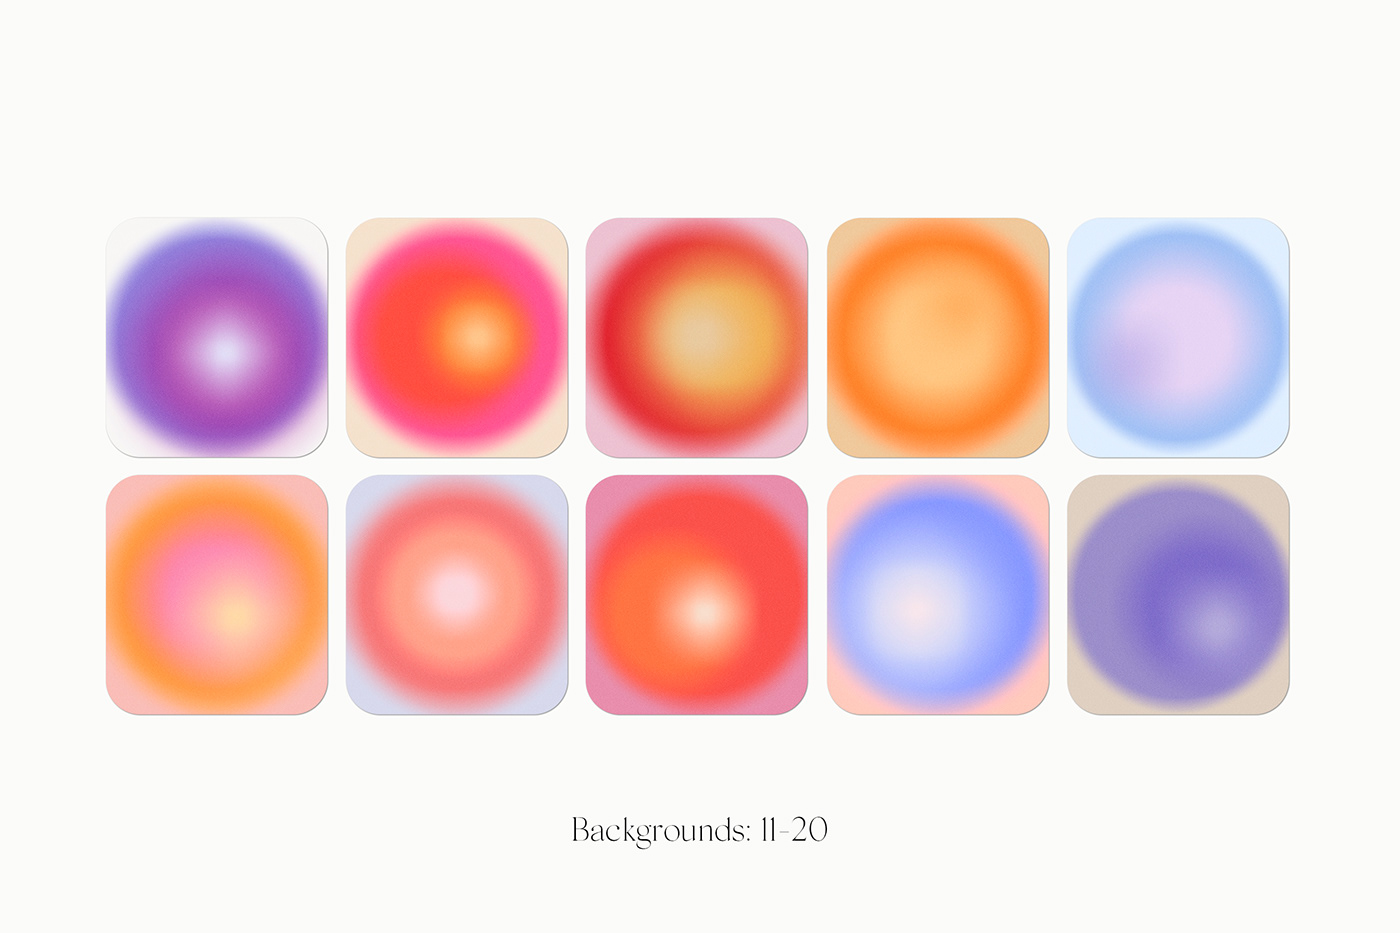 abstract aesthetic backgrounds colorful download now gradients Patterns png psd jpg Round Circle textures